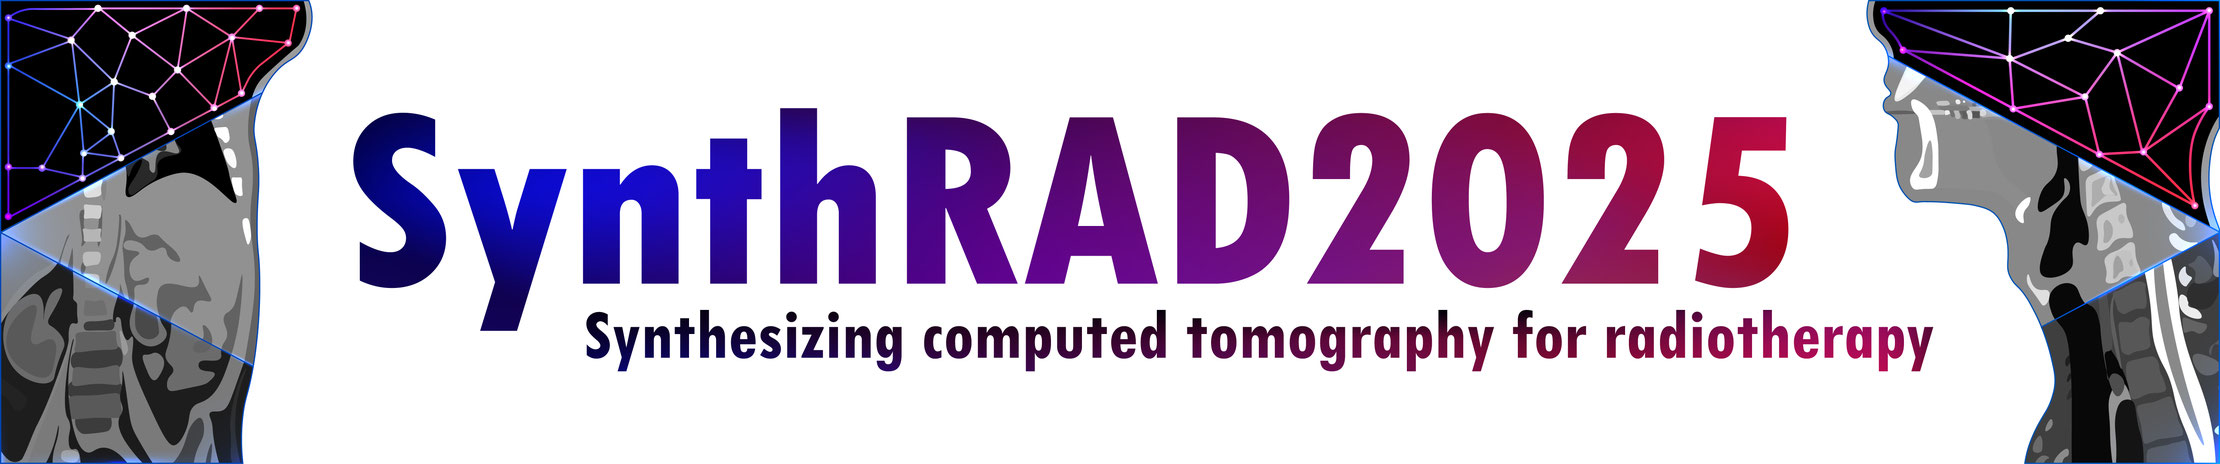 SynthRAD2025 Banner